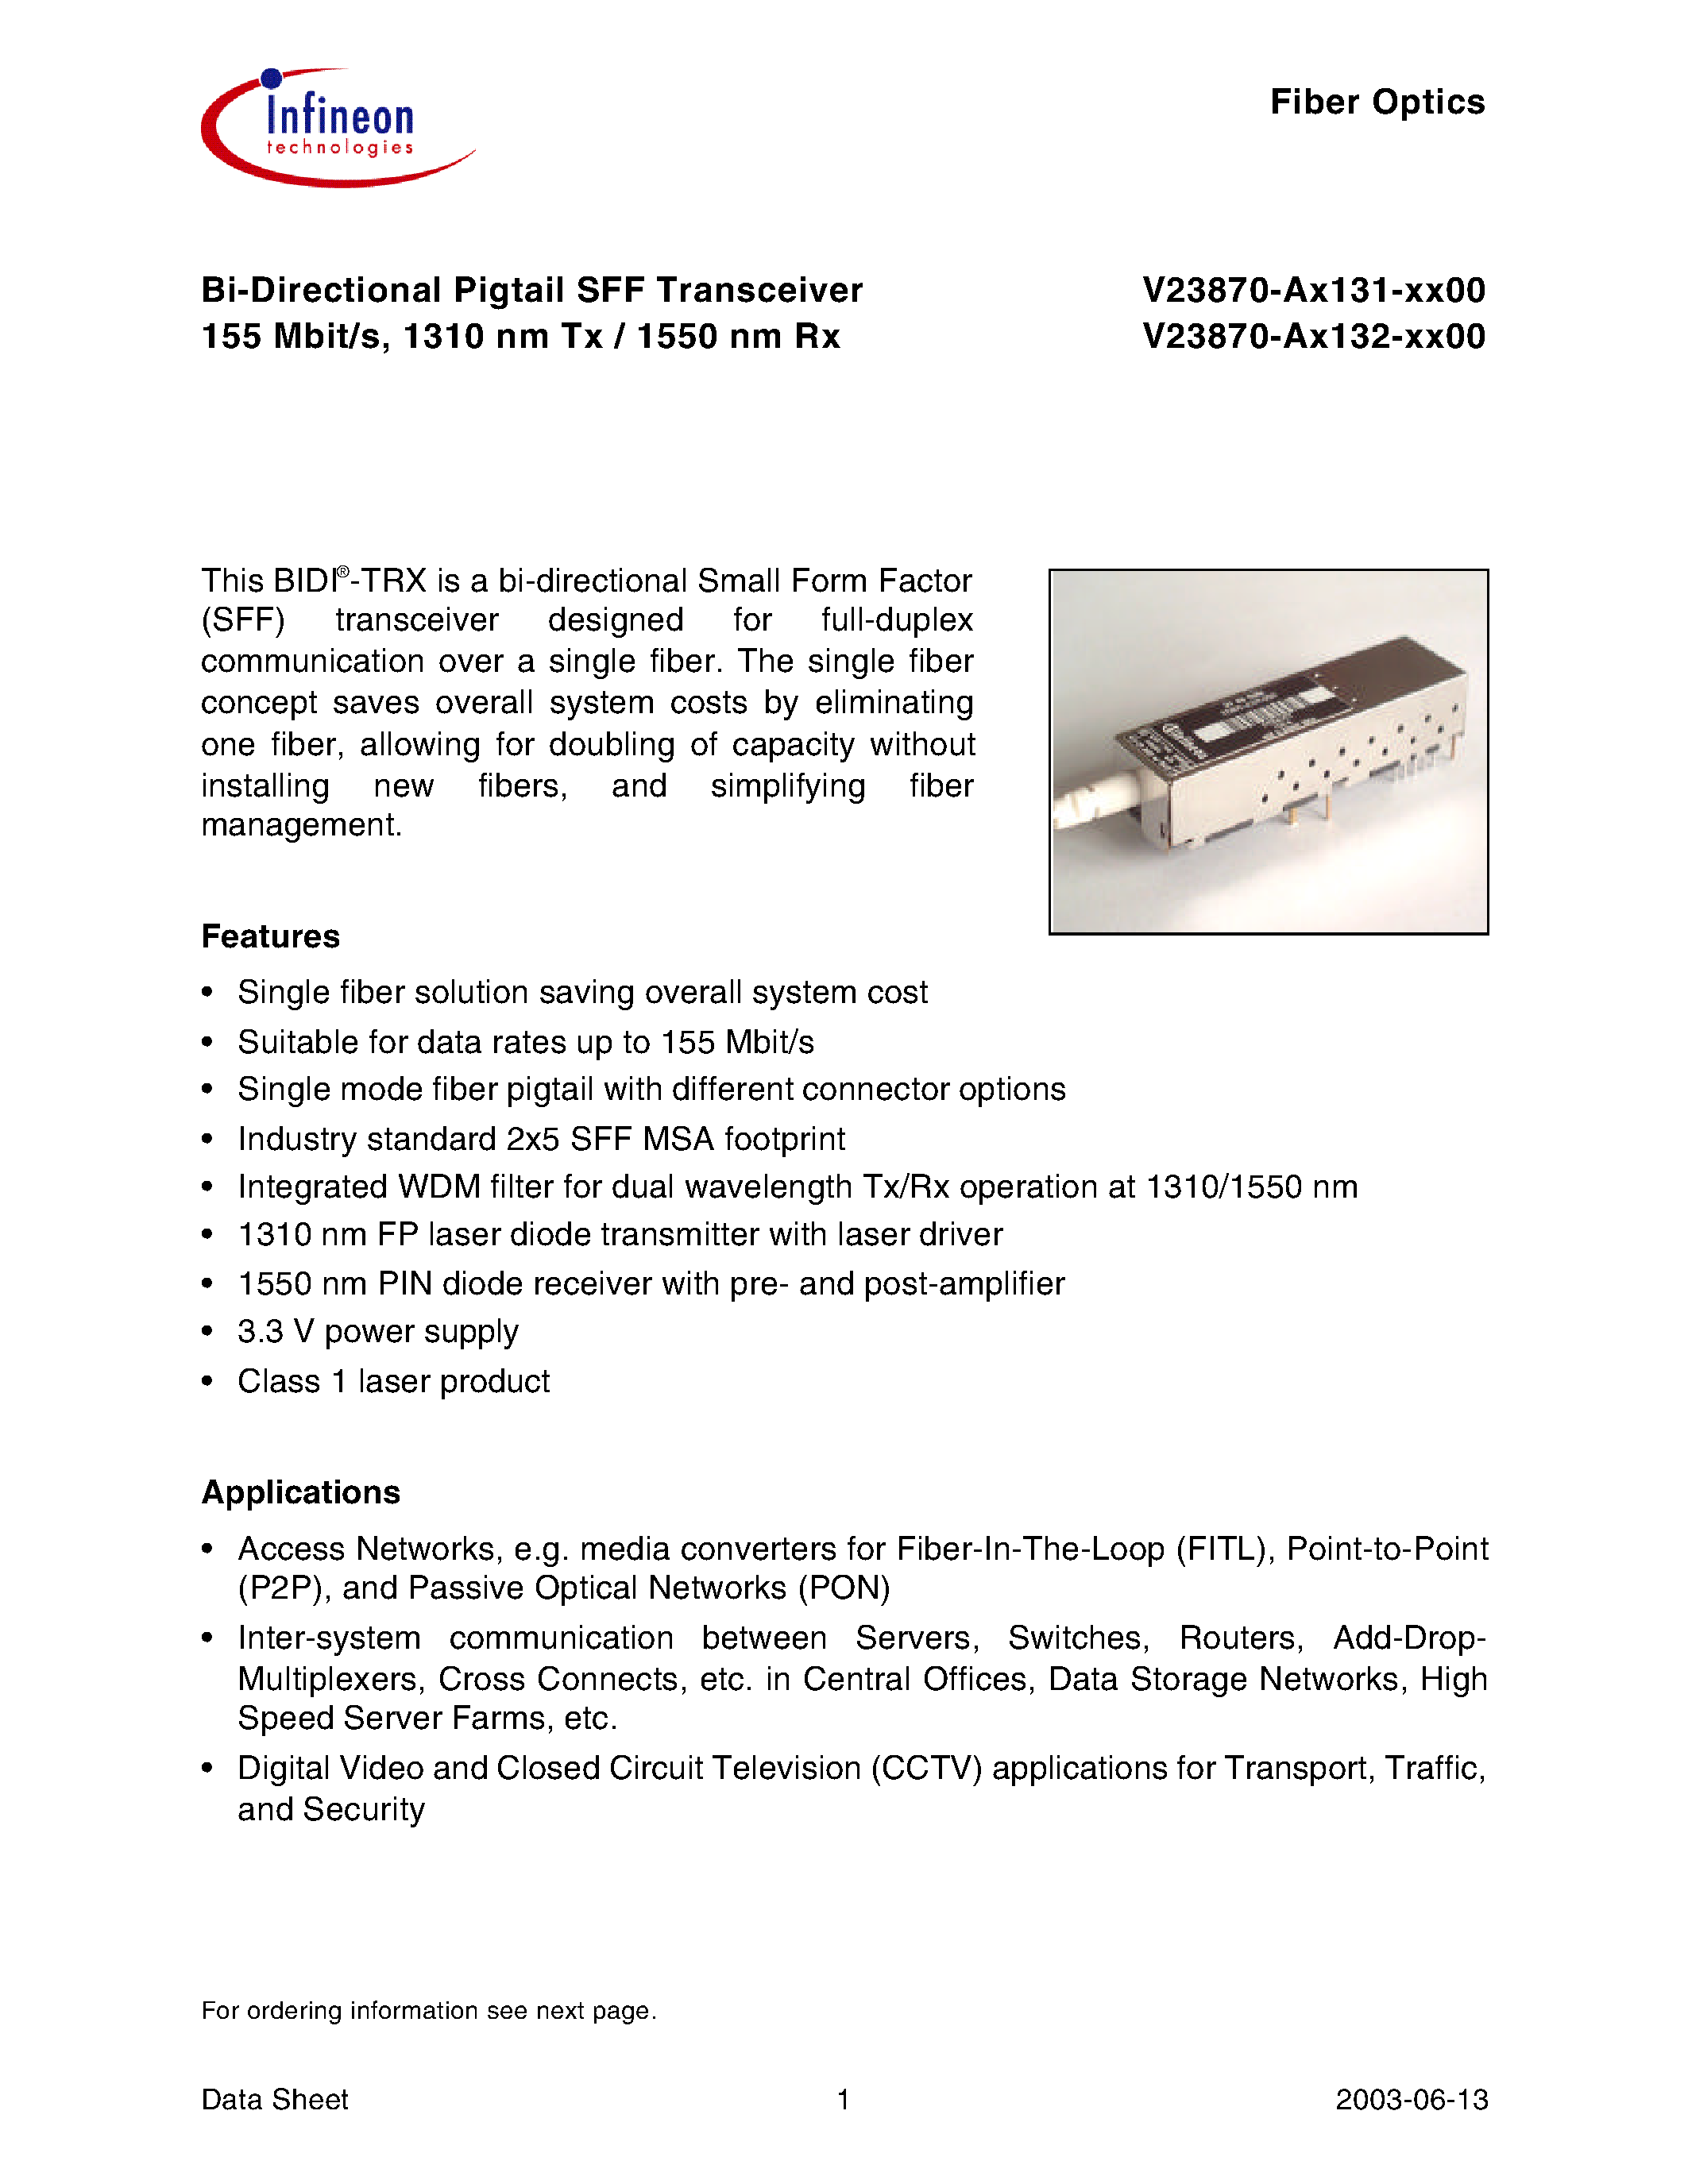 Datasheet V23870-A1132-A200 - Bi-Directional Pigtail SFF Transceiver 155 Mbit/s/ 1310 nm Tx / 1550 nm Rx page 1